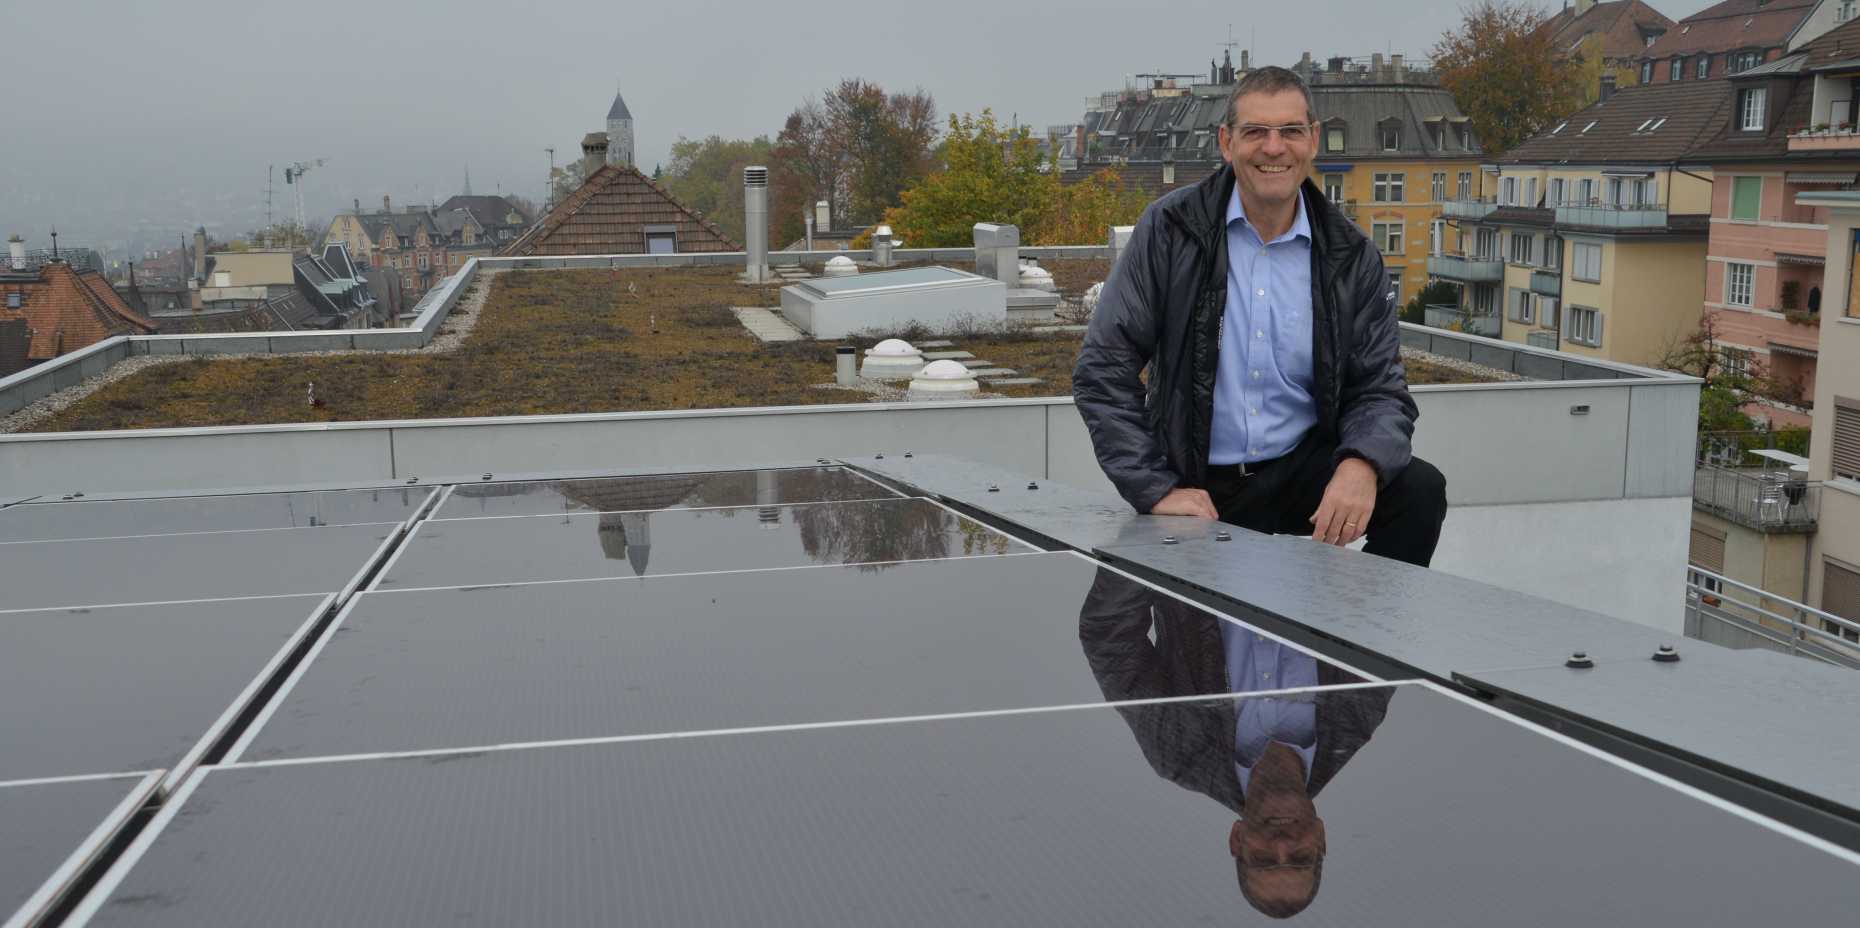 Enlarged view: Prof. Leibundgut with new hybrid collector devel-oped at ETH, which serves as a photovoltaic system that delivers solar power